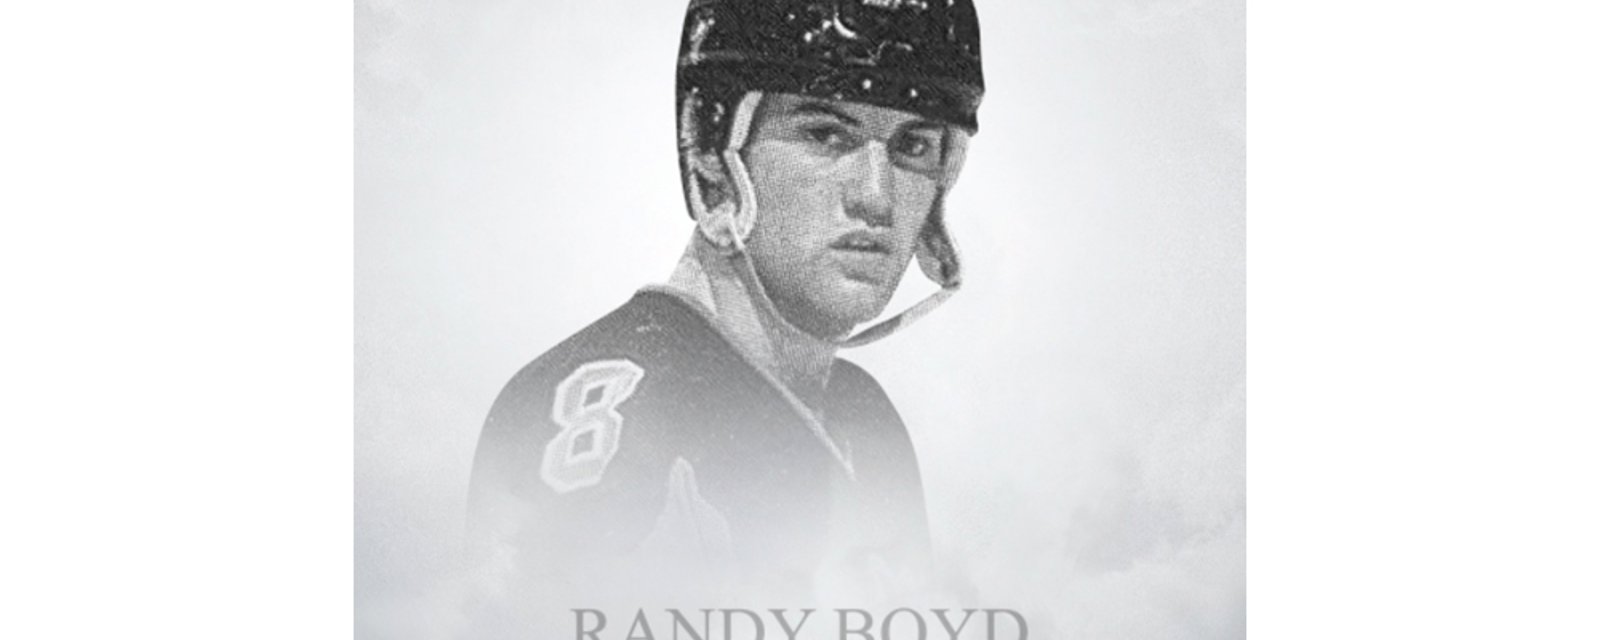 Former NHLer and Hanson Brothers linemate Randy Boyd passes away at just 59 years old